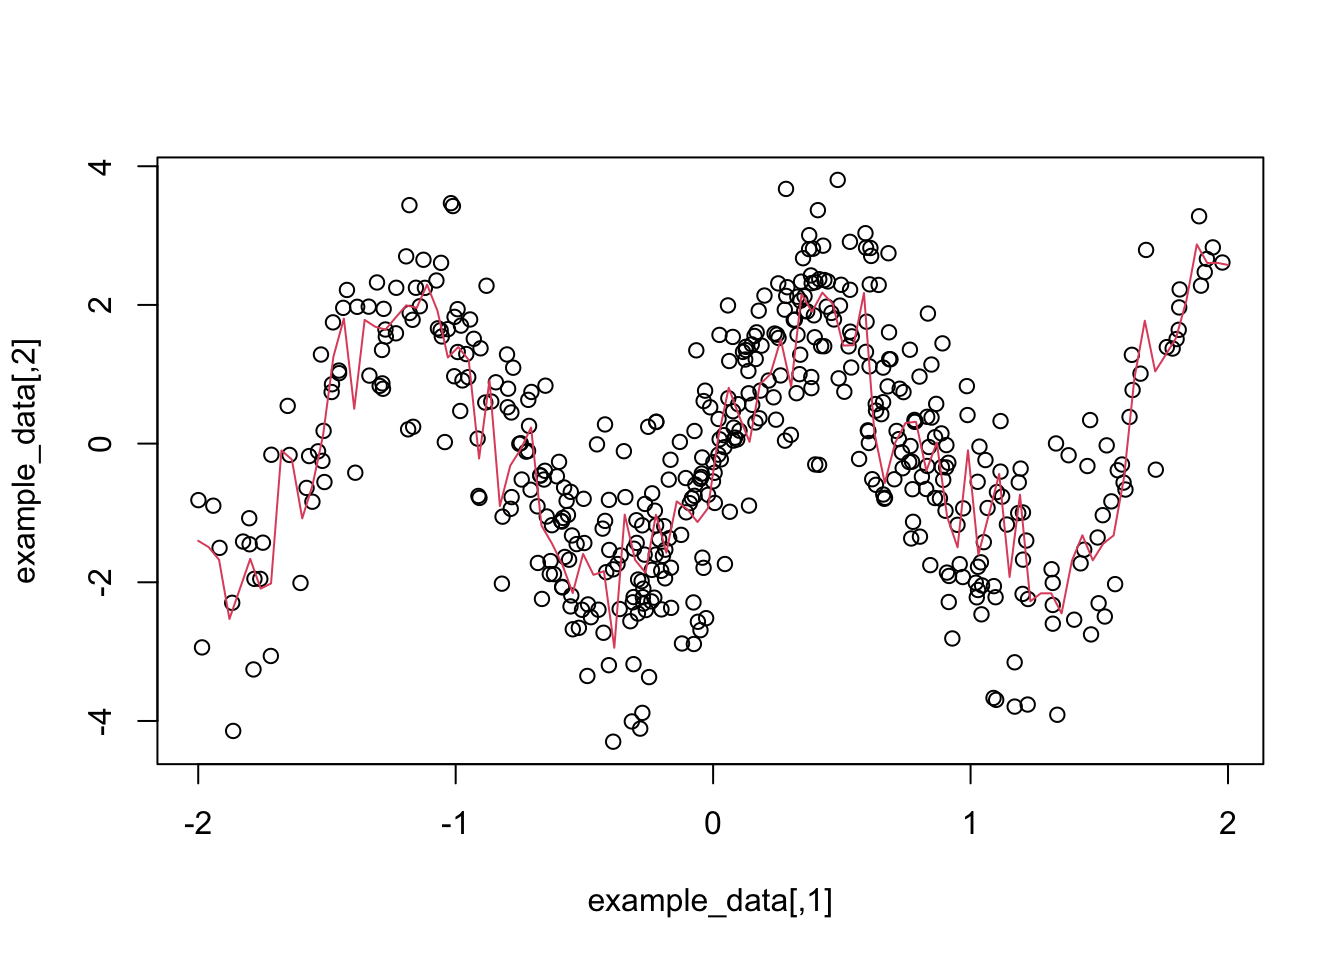 The red line shows the prediction obtained through random forest.